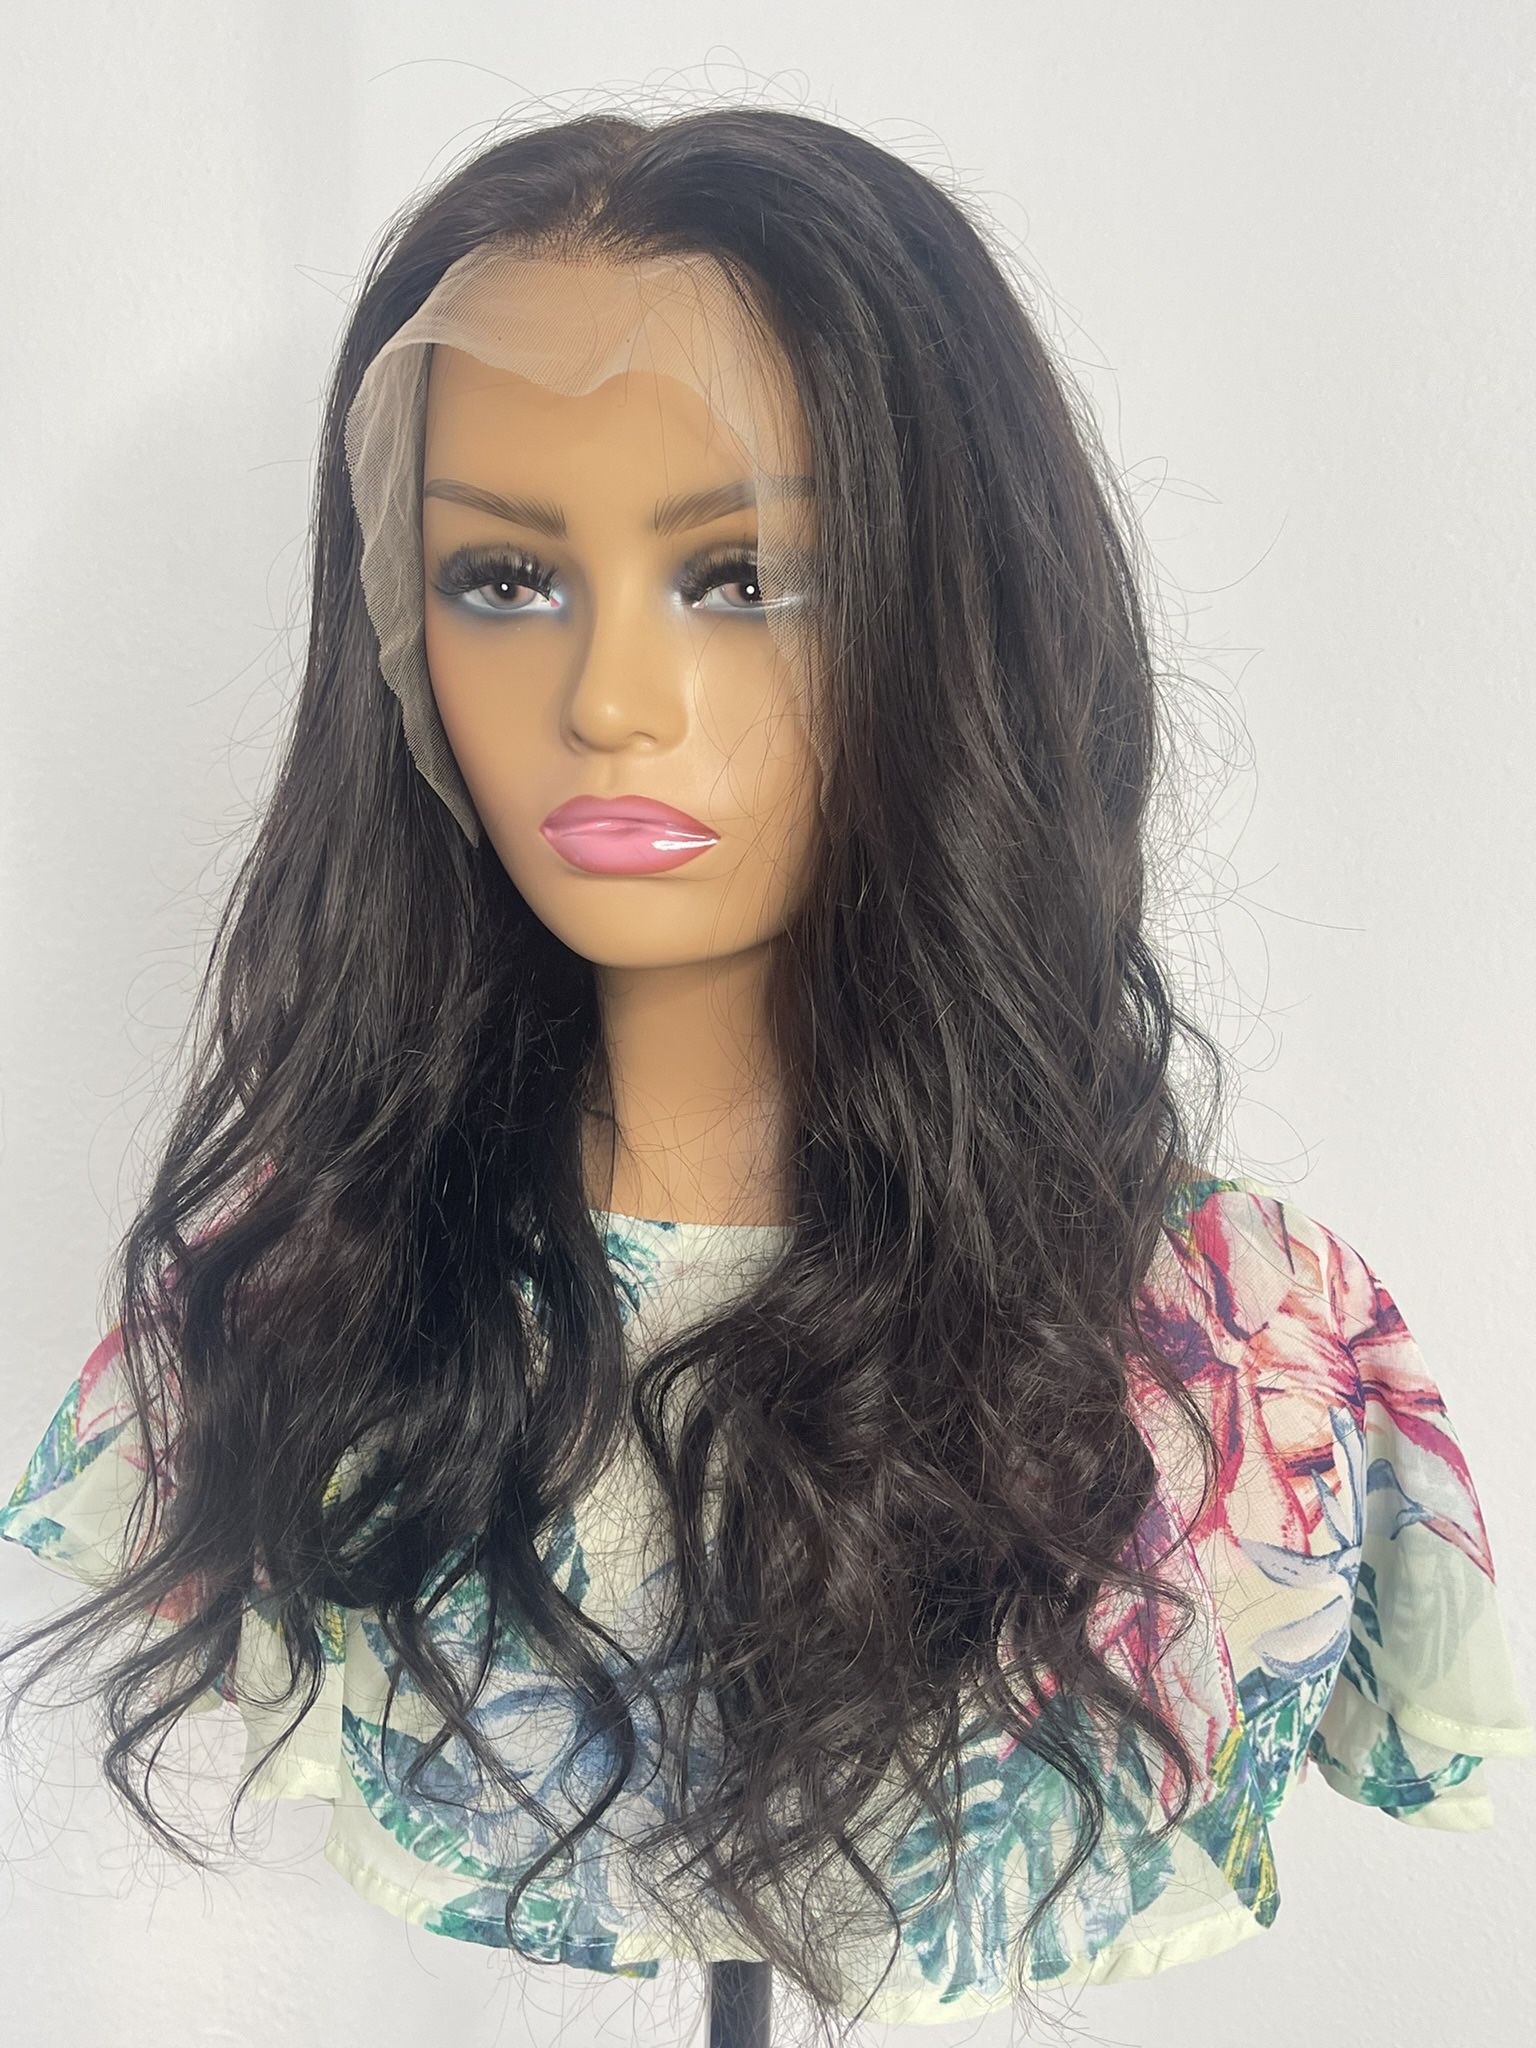 100% Human Hair Lace Front Wig 